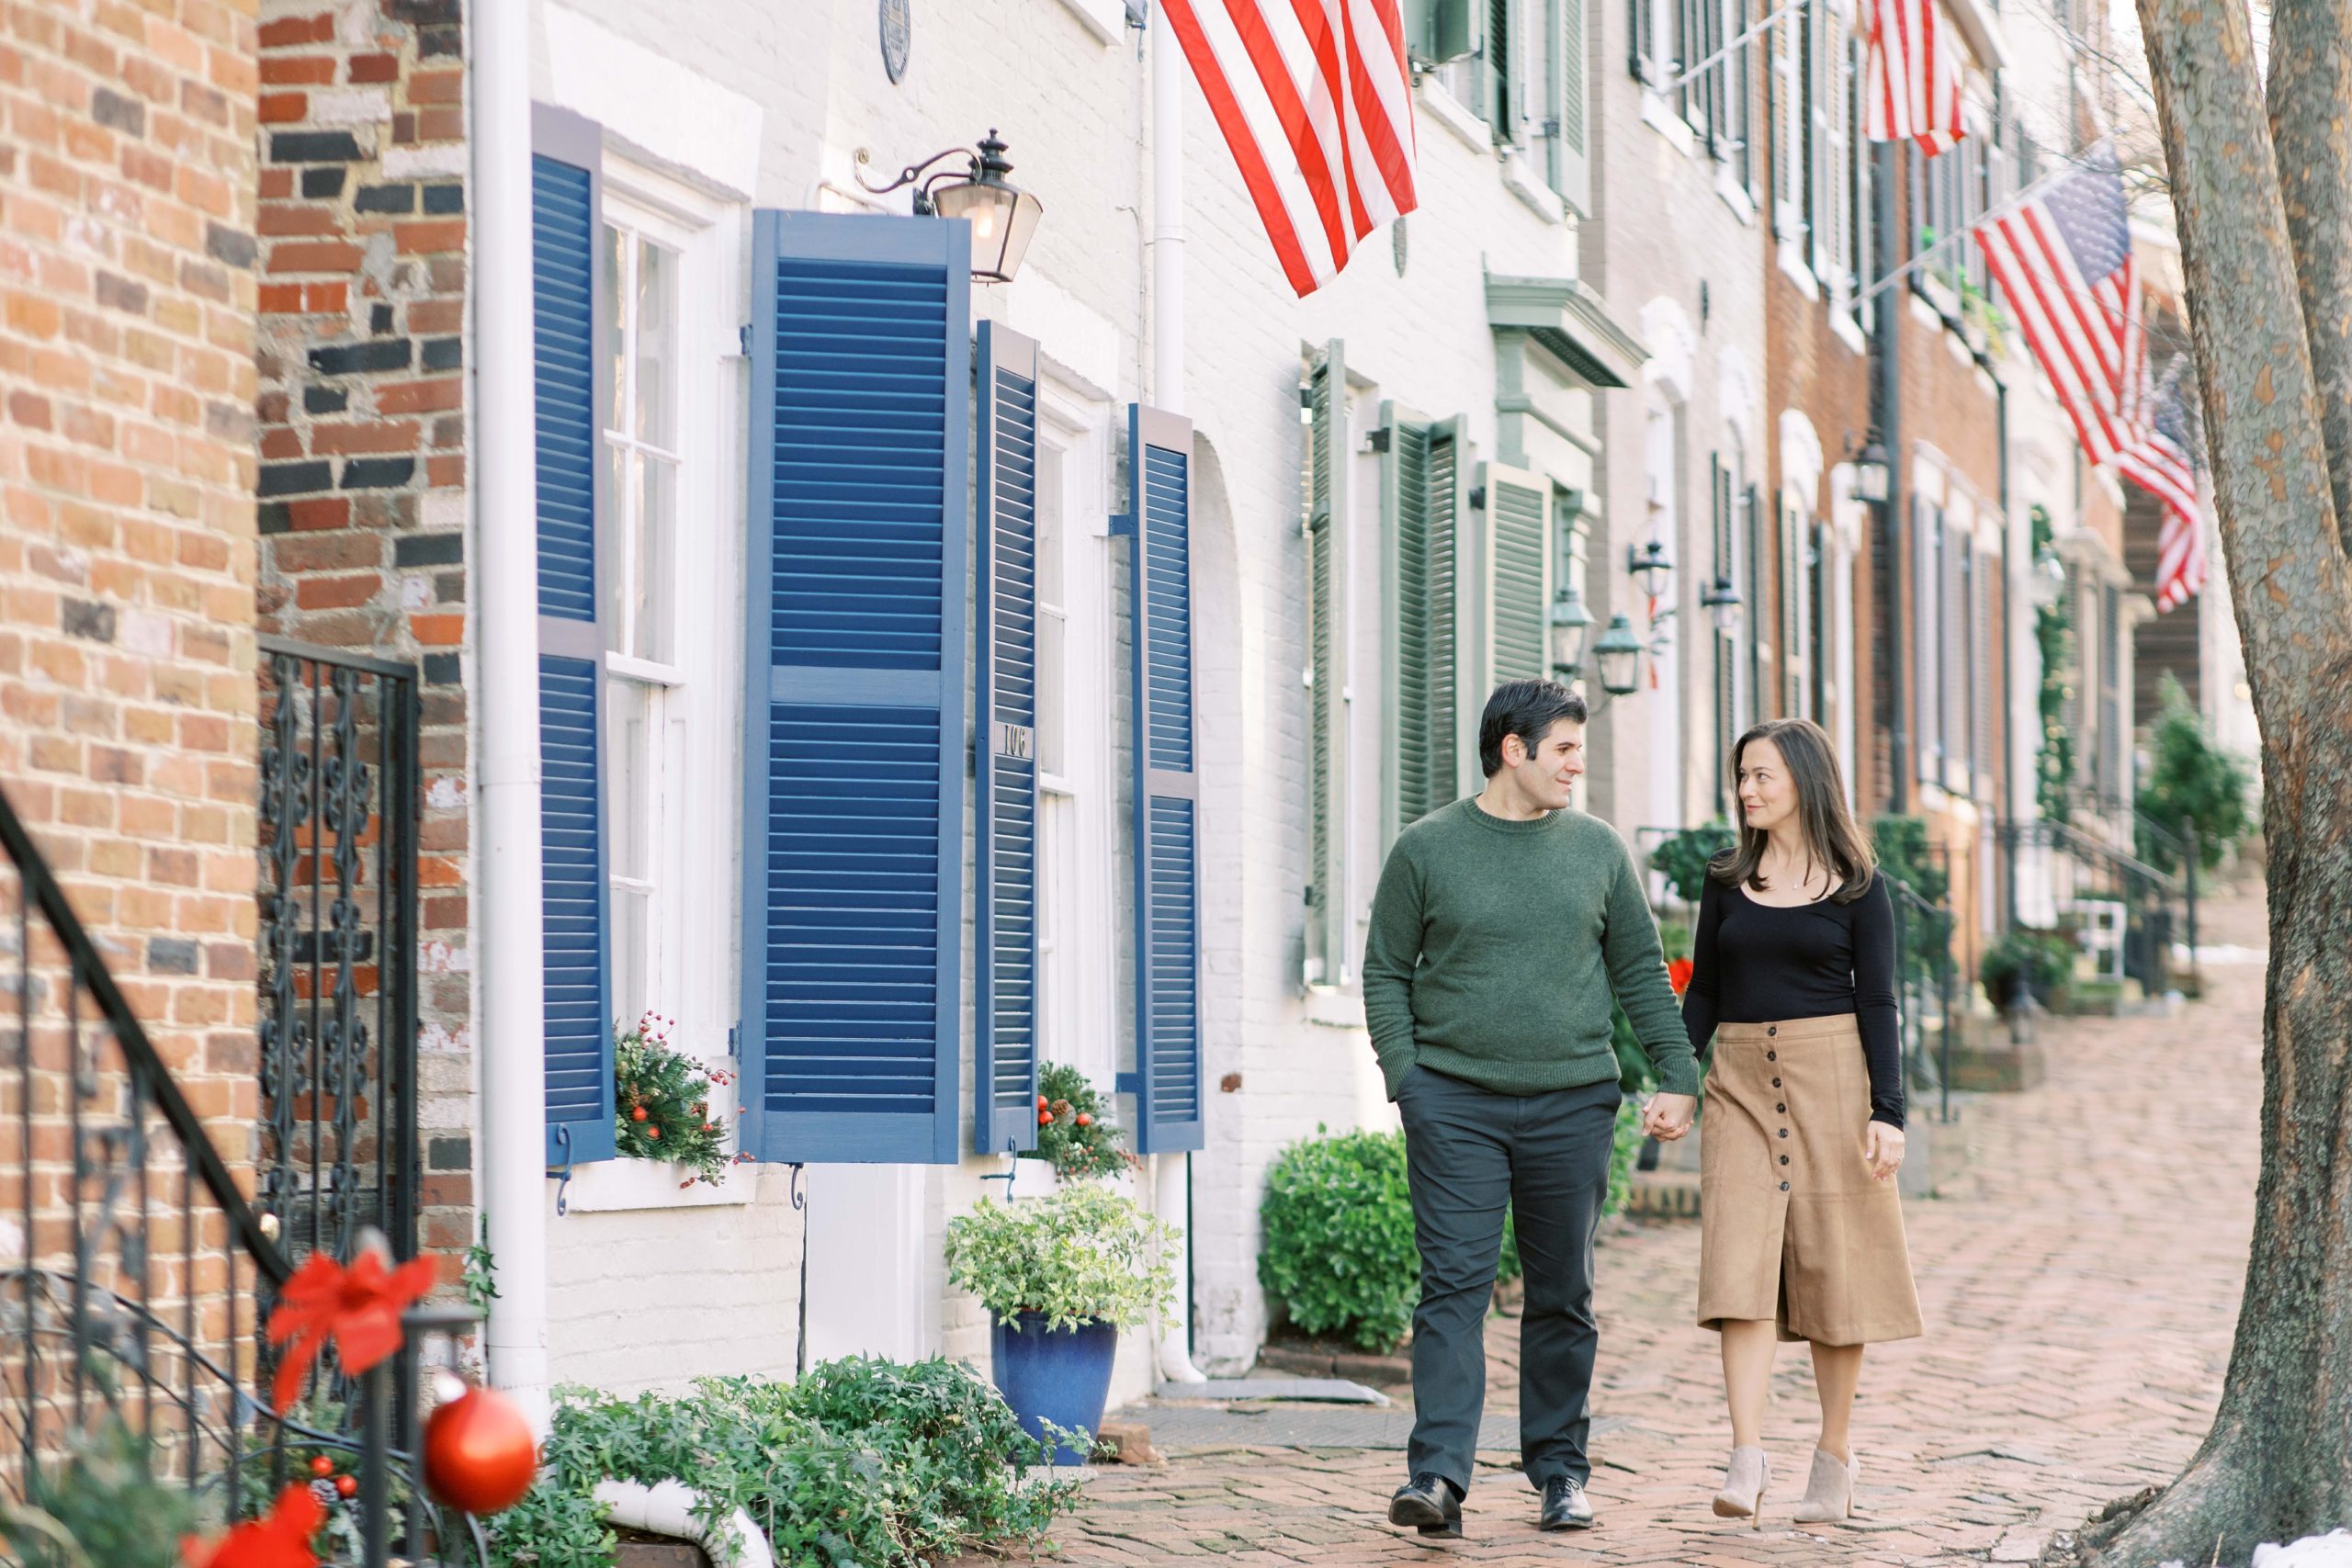 A romantic winter engagement session in Old Town Alexandria, VA.